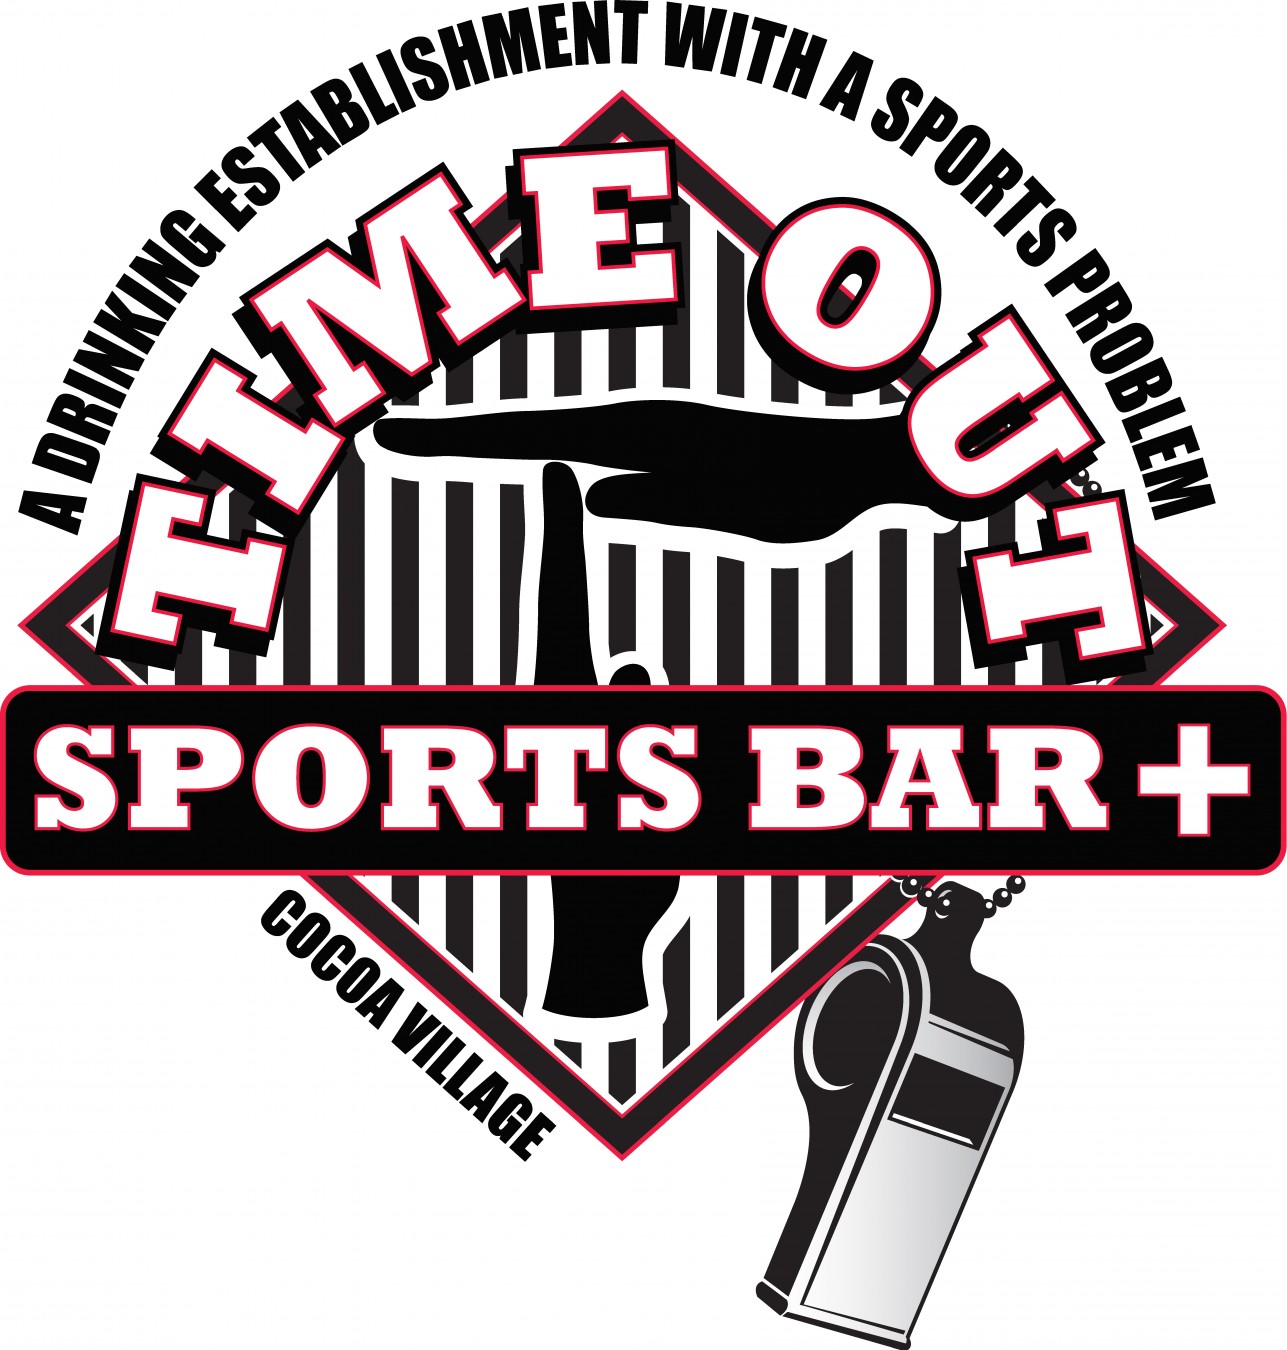 Time Out Sports Bar